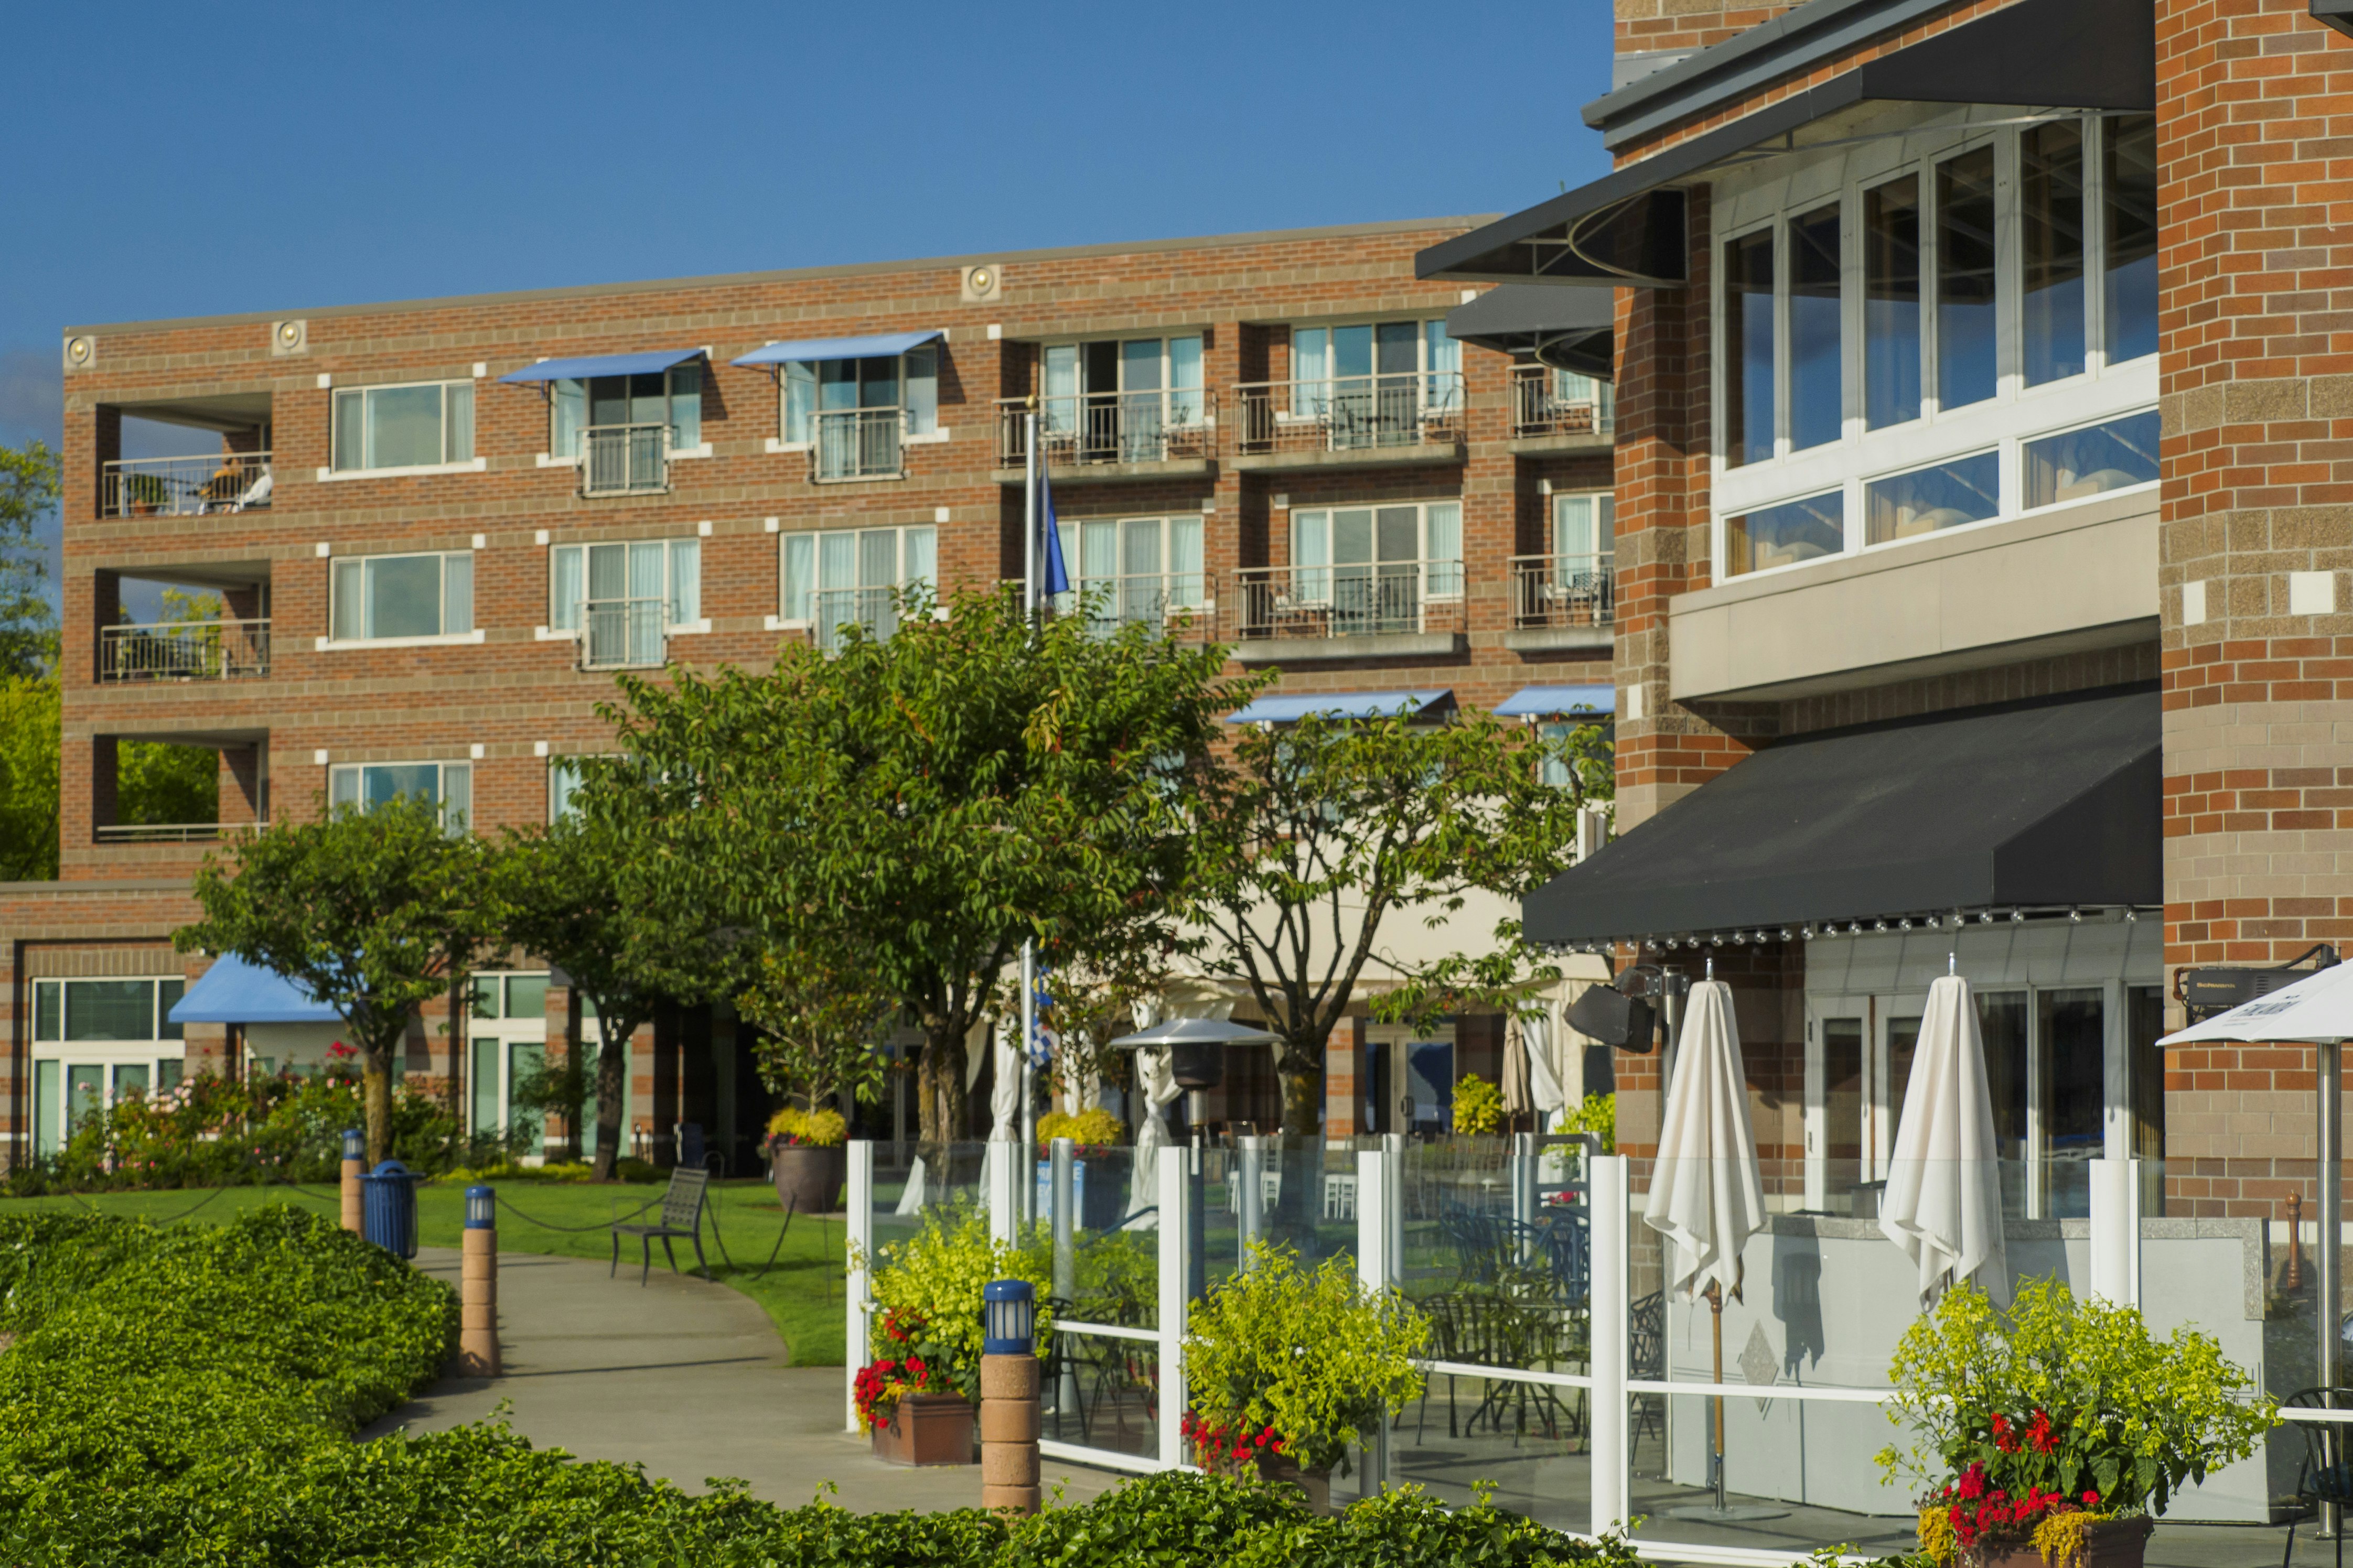 The brick, contemporary exterior of the Woodmark Hotel, which overlooks Lake Washington in Kirkland